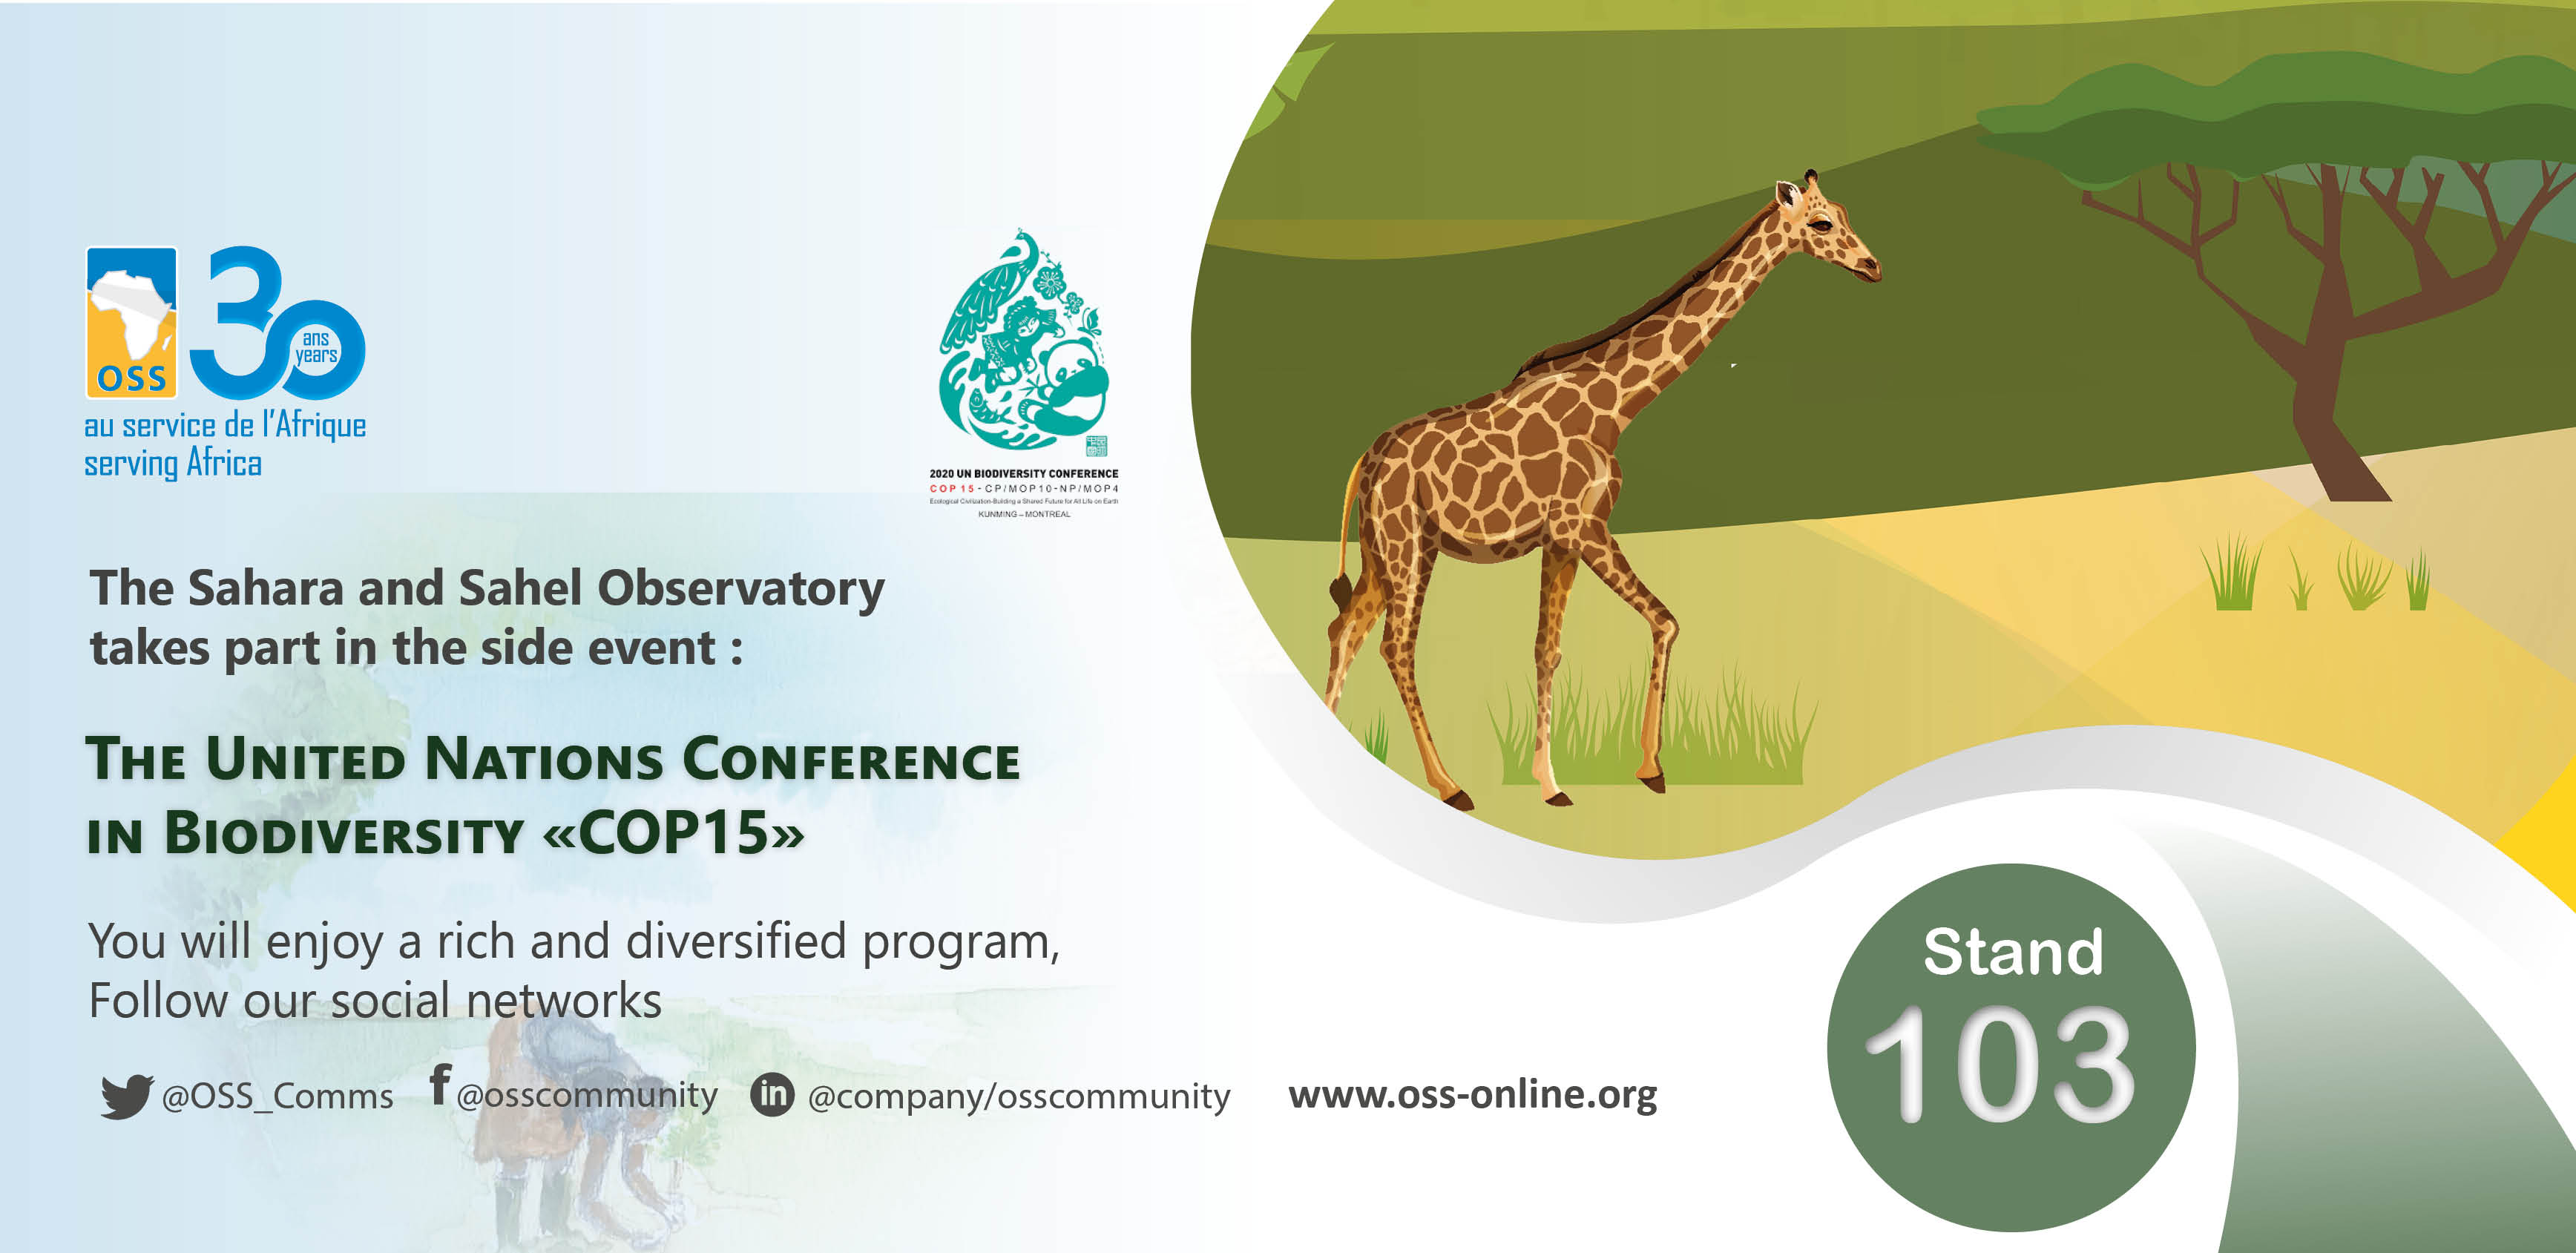 The Sahara and Sahel Observatory is taking part in the UNCBD (COP15)